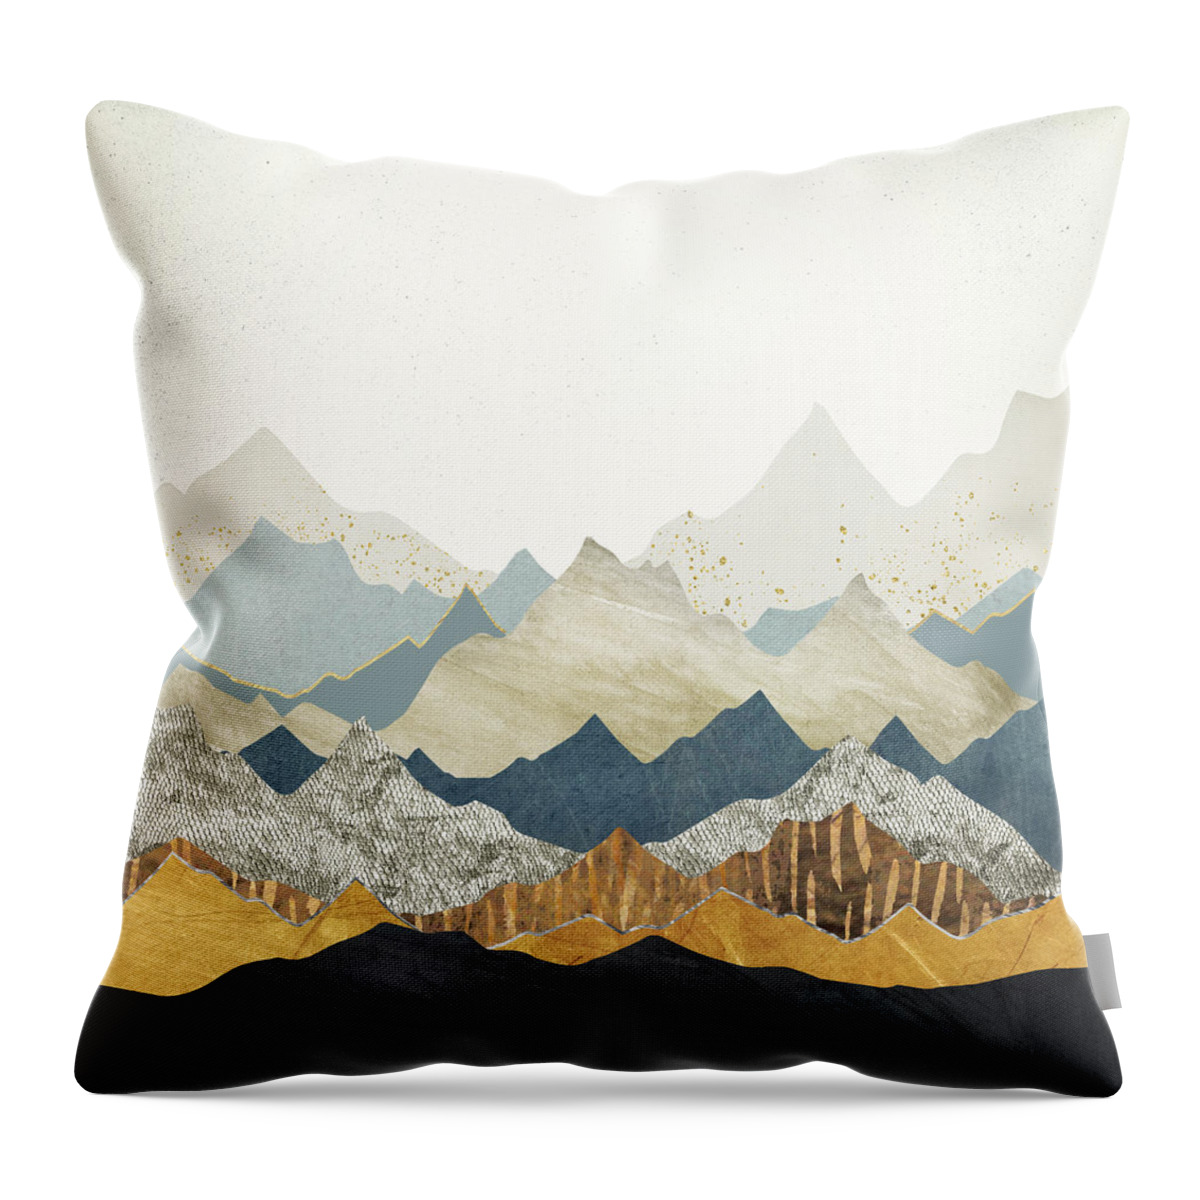 Mountains Throw Pillow featuring the digital art Distant Peaks by Spacefrog Designs